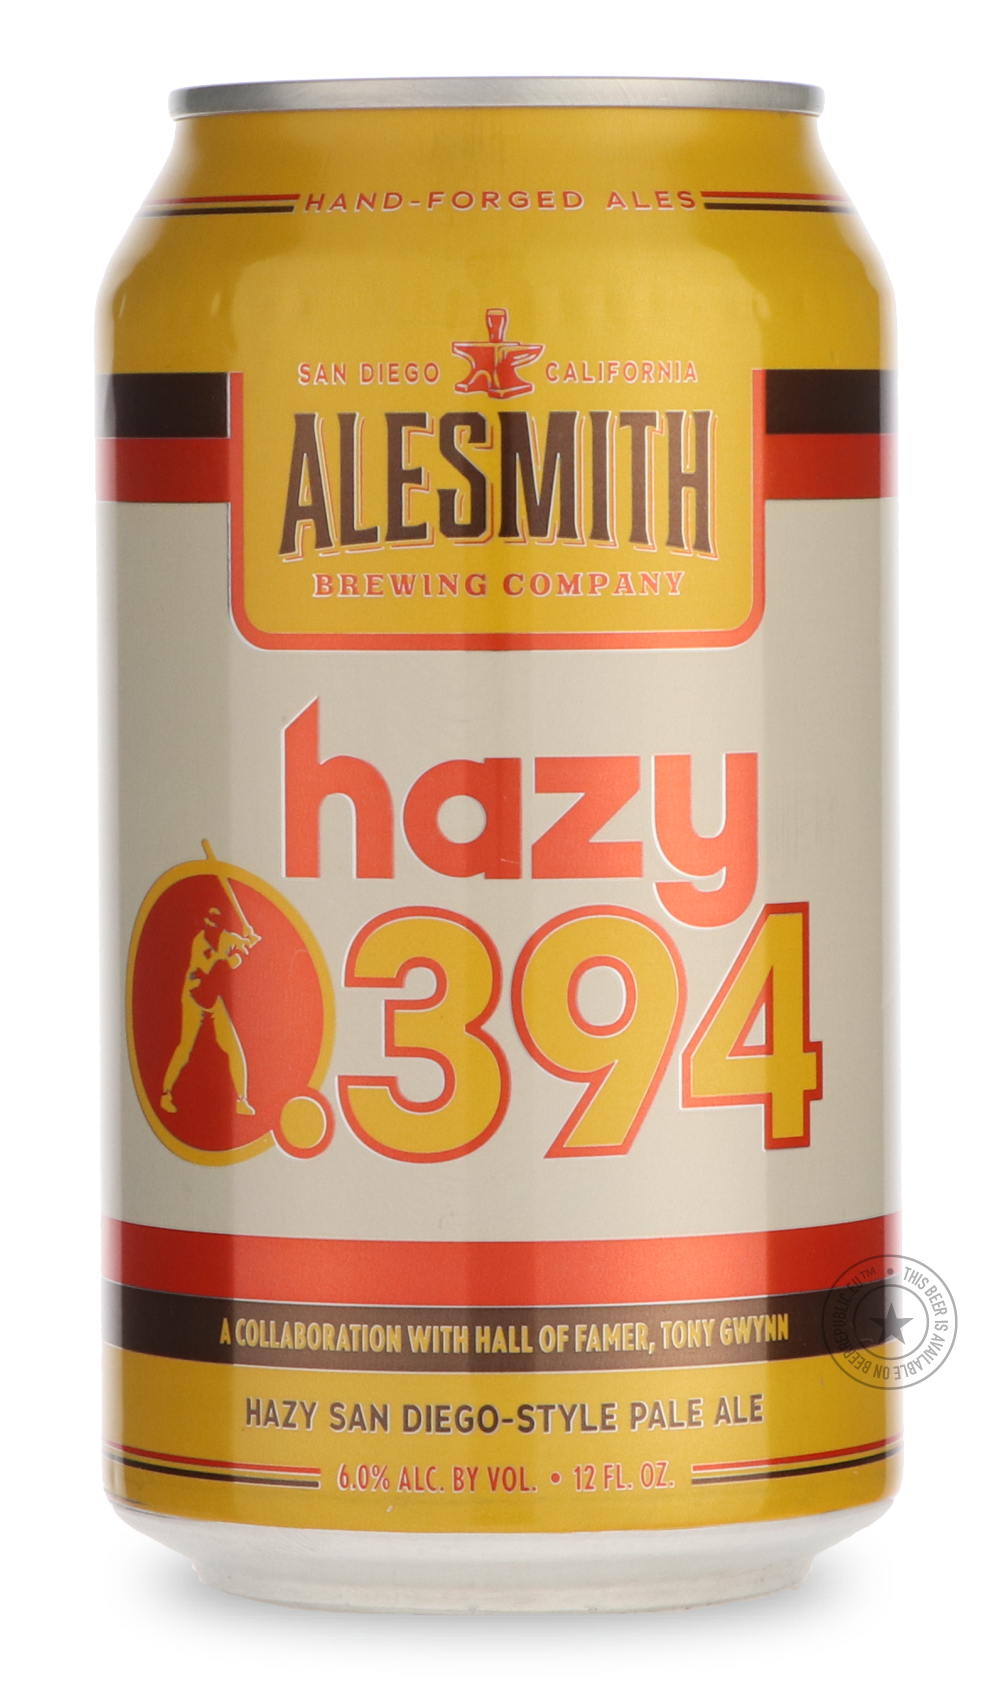 -AleSmith- Hazy .394-Pale- Only @ Beer Republic - The best online beer store for American & Canadian craft beer - Buy beer online from the USA and Canada - Bier online kopen - Amerikaans bier kopen - Craft beer store - Craft beer kopen - Amerikanisch bier kaufen - Bier online kaufen - Acheter biere online - IPA - Stout - Porter - New England IPA - Hazy IPA - Imperial Stout - Barrel Aged - Barrel Aged Imperial Stout - Brown - Dark beer - Blond - Blonde - Pilsner - Lager - Wheat - Weizen - Amber - Barley Wine